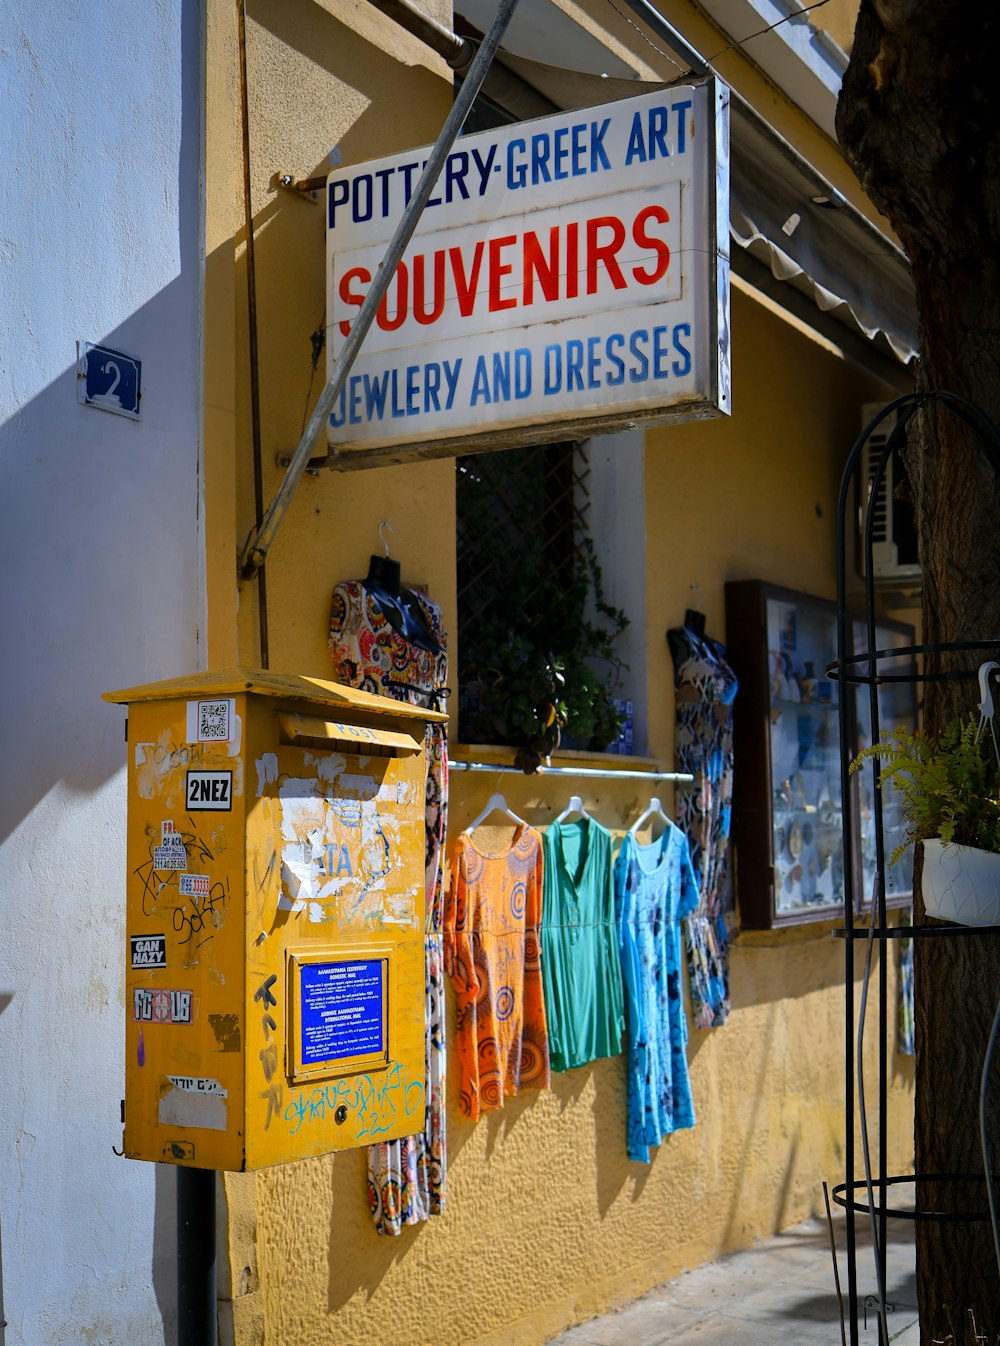 a store with a sign that says potty - fry greek art souvenirs